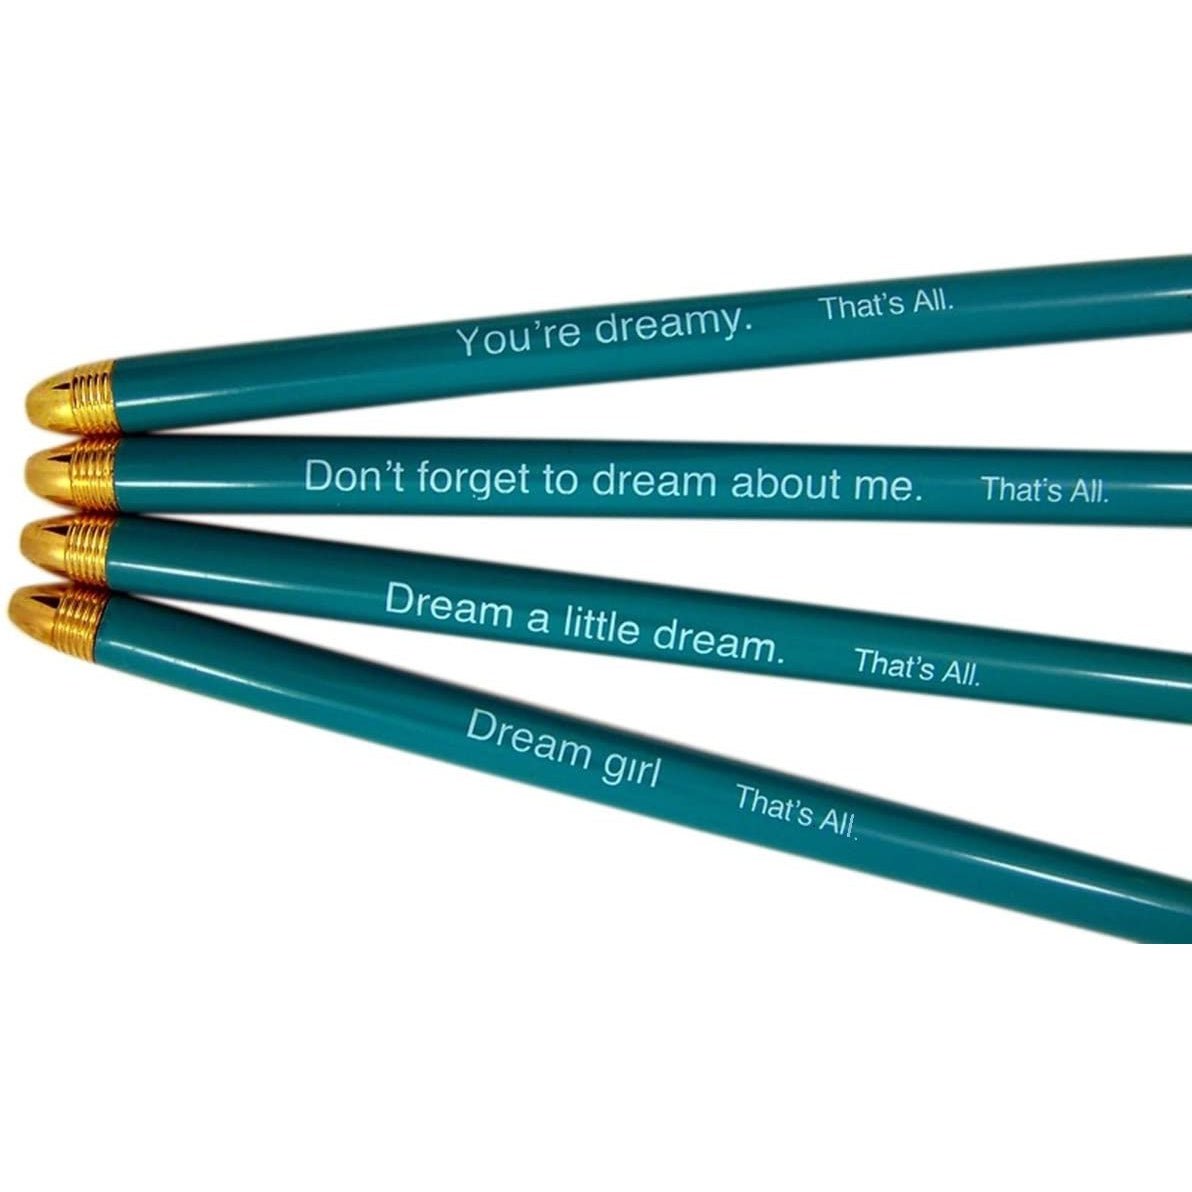 Dream Girl Teal Crown Pen Set of 12 | Giftable Quote Pens | Novelty Office Desk Supplies